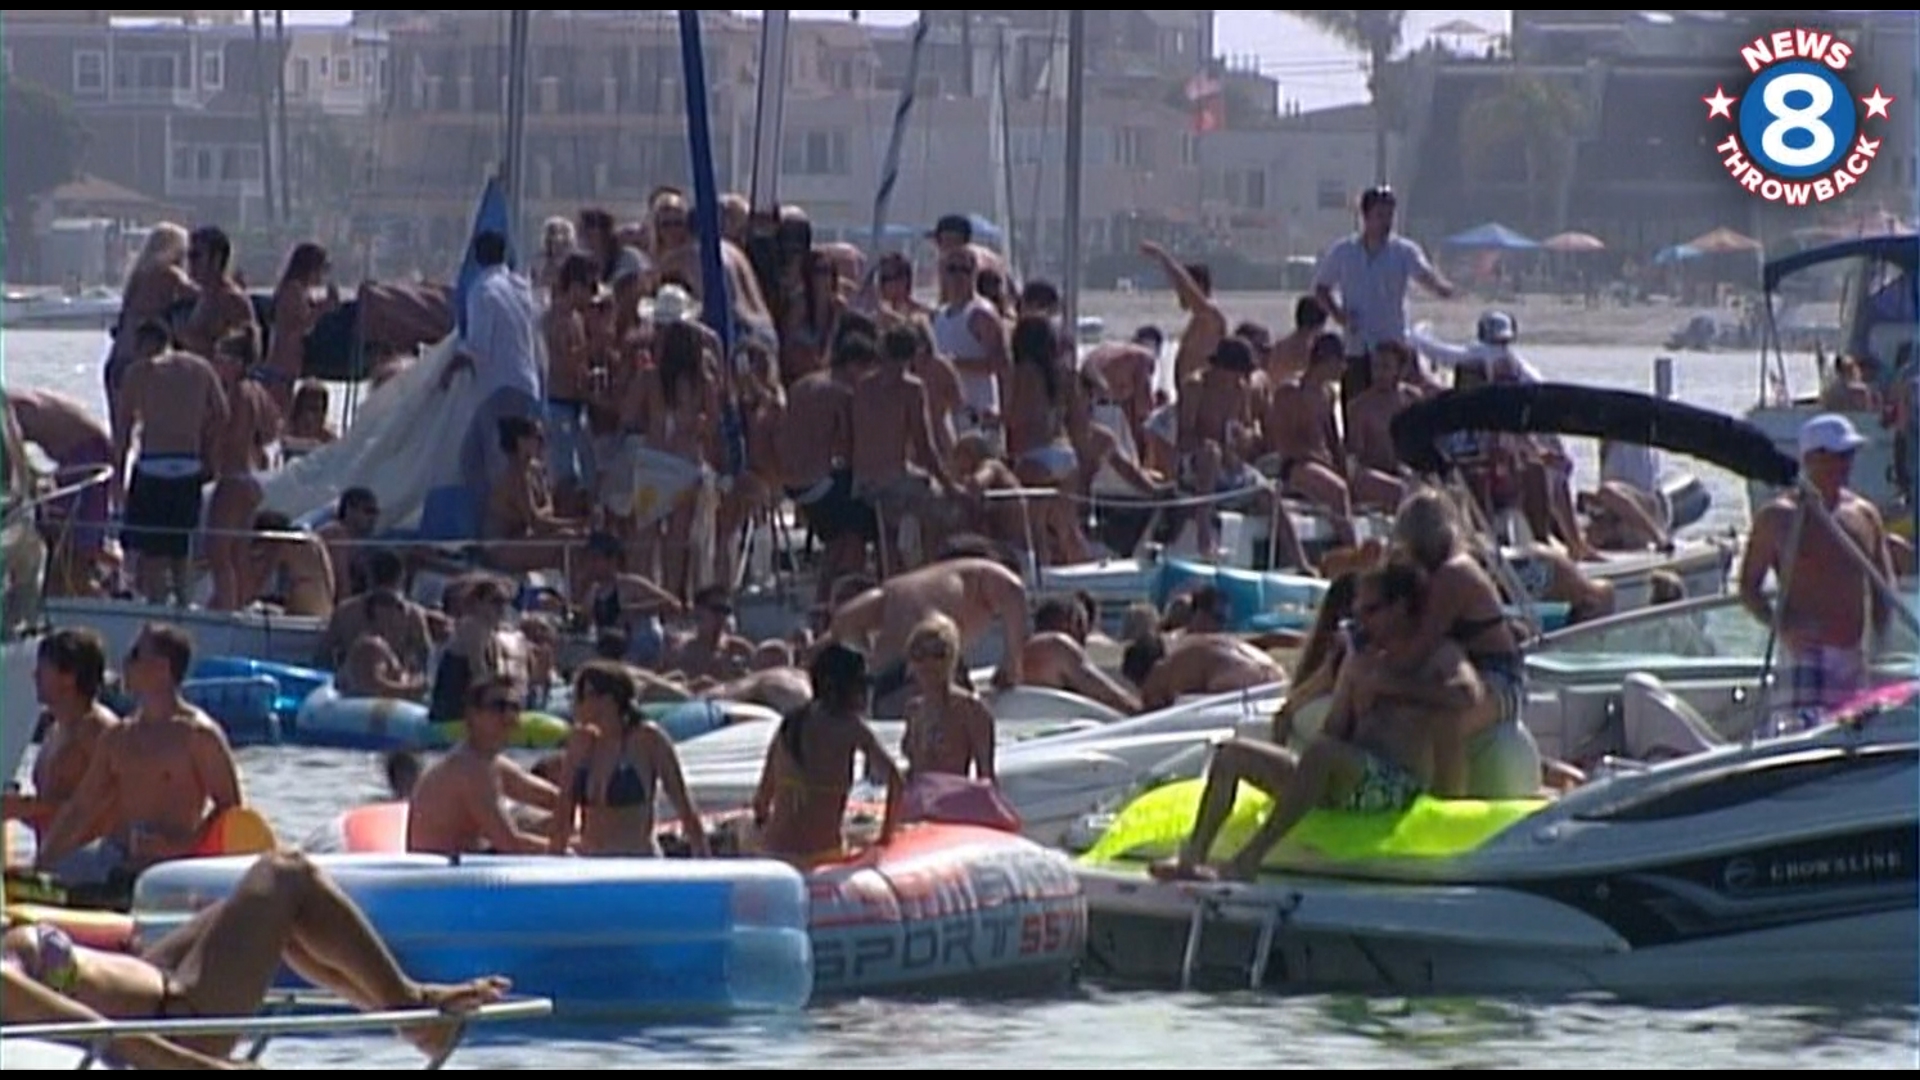 Thousands of revelers flocked to Mission Bay during the summer of 2009 to circumvent San Diego's beach alcohol ban by taking the party to the water.